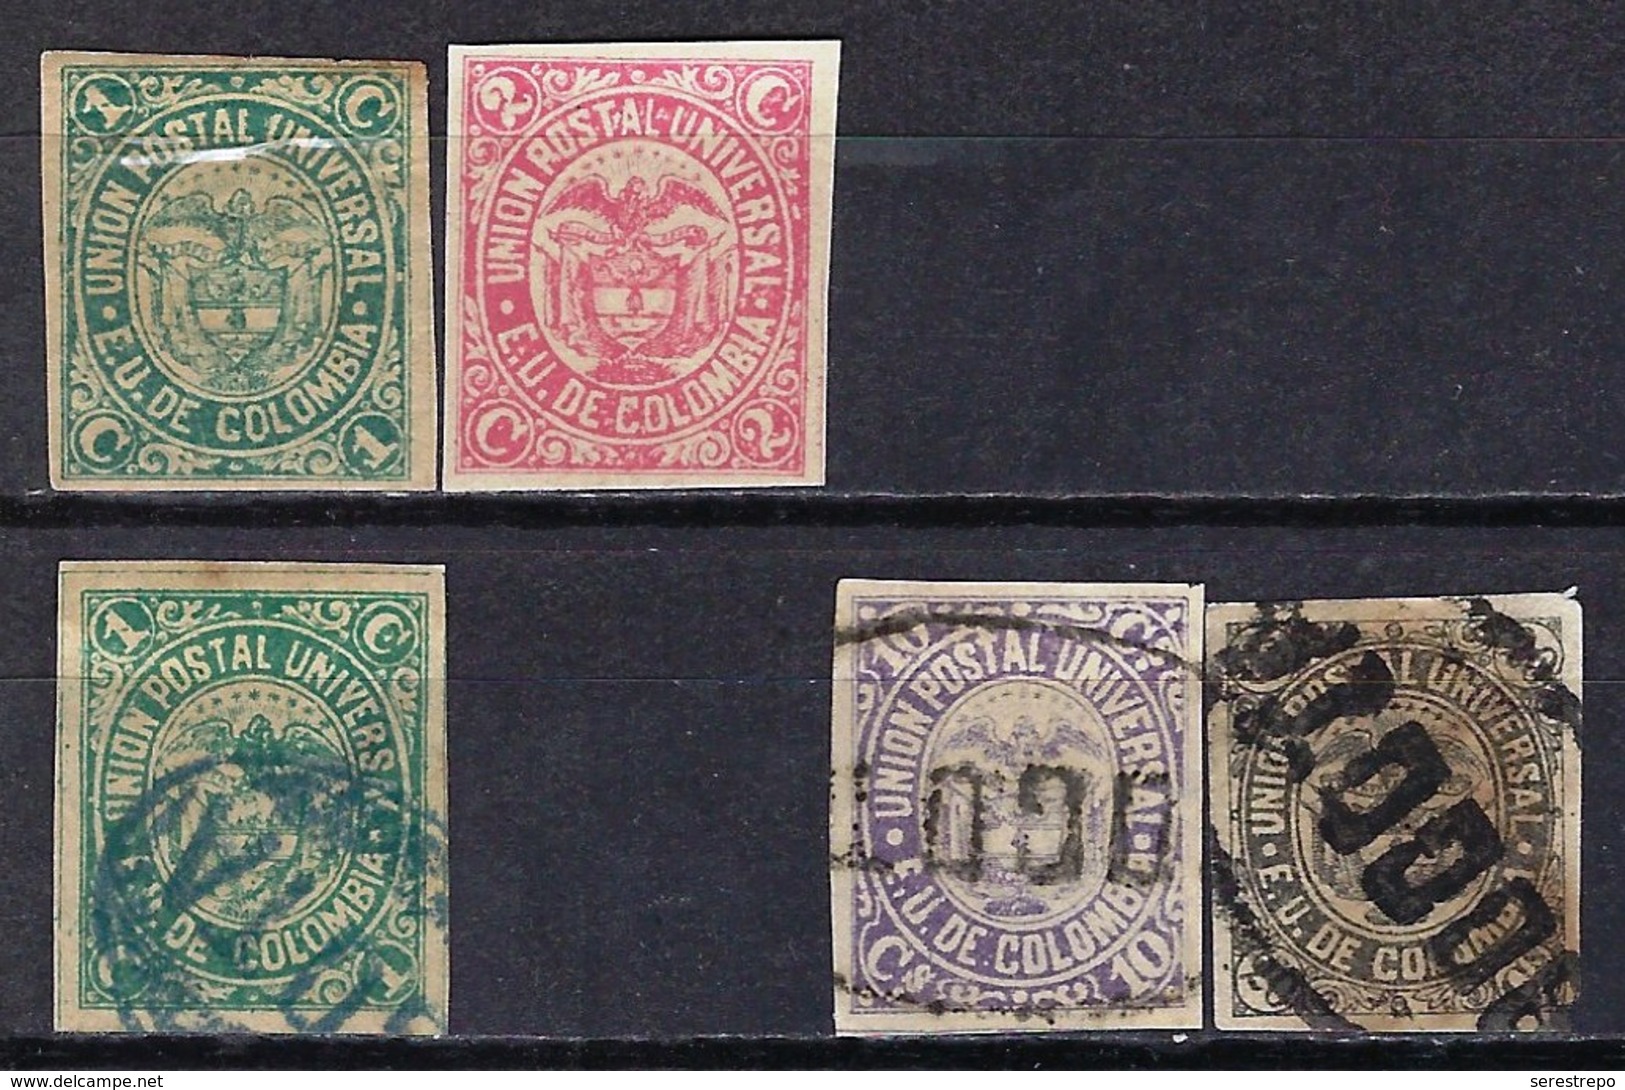 COLOMBIA 1881.06.01 [80,81&83,84-1] Union Postal Universal - New & Used - Colombia